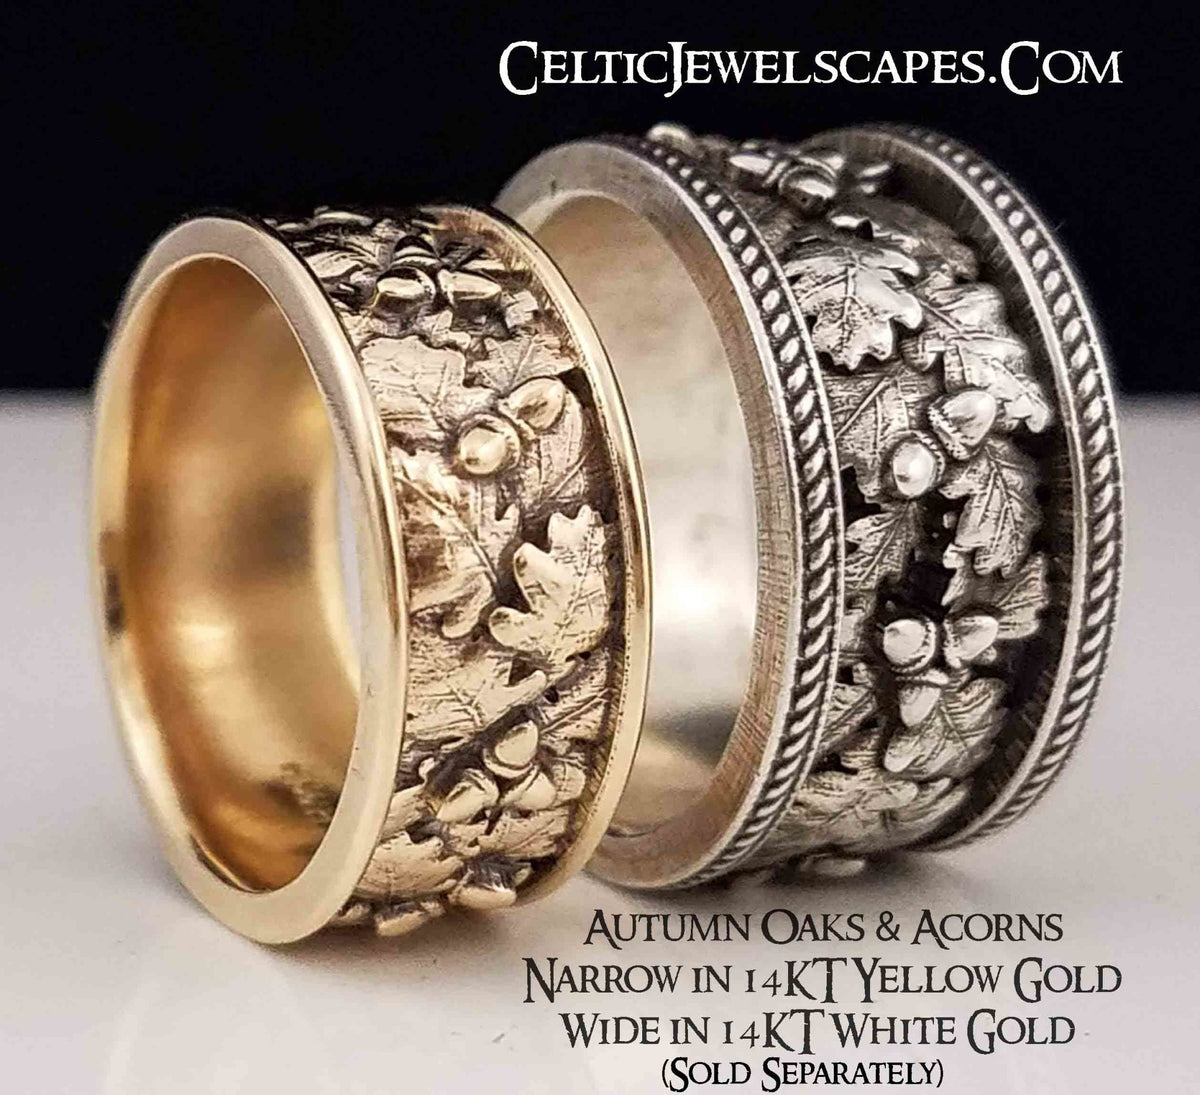 AUTUMN OAKS AND ACORNS NARROW - Starting at $139 - Celtic Jewelscapes